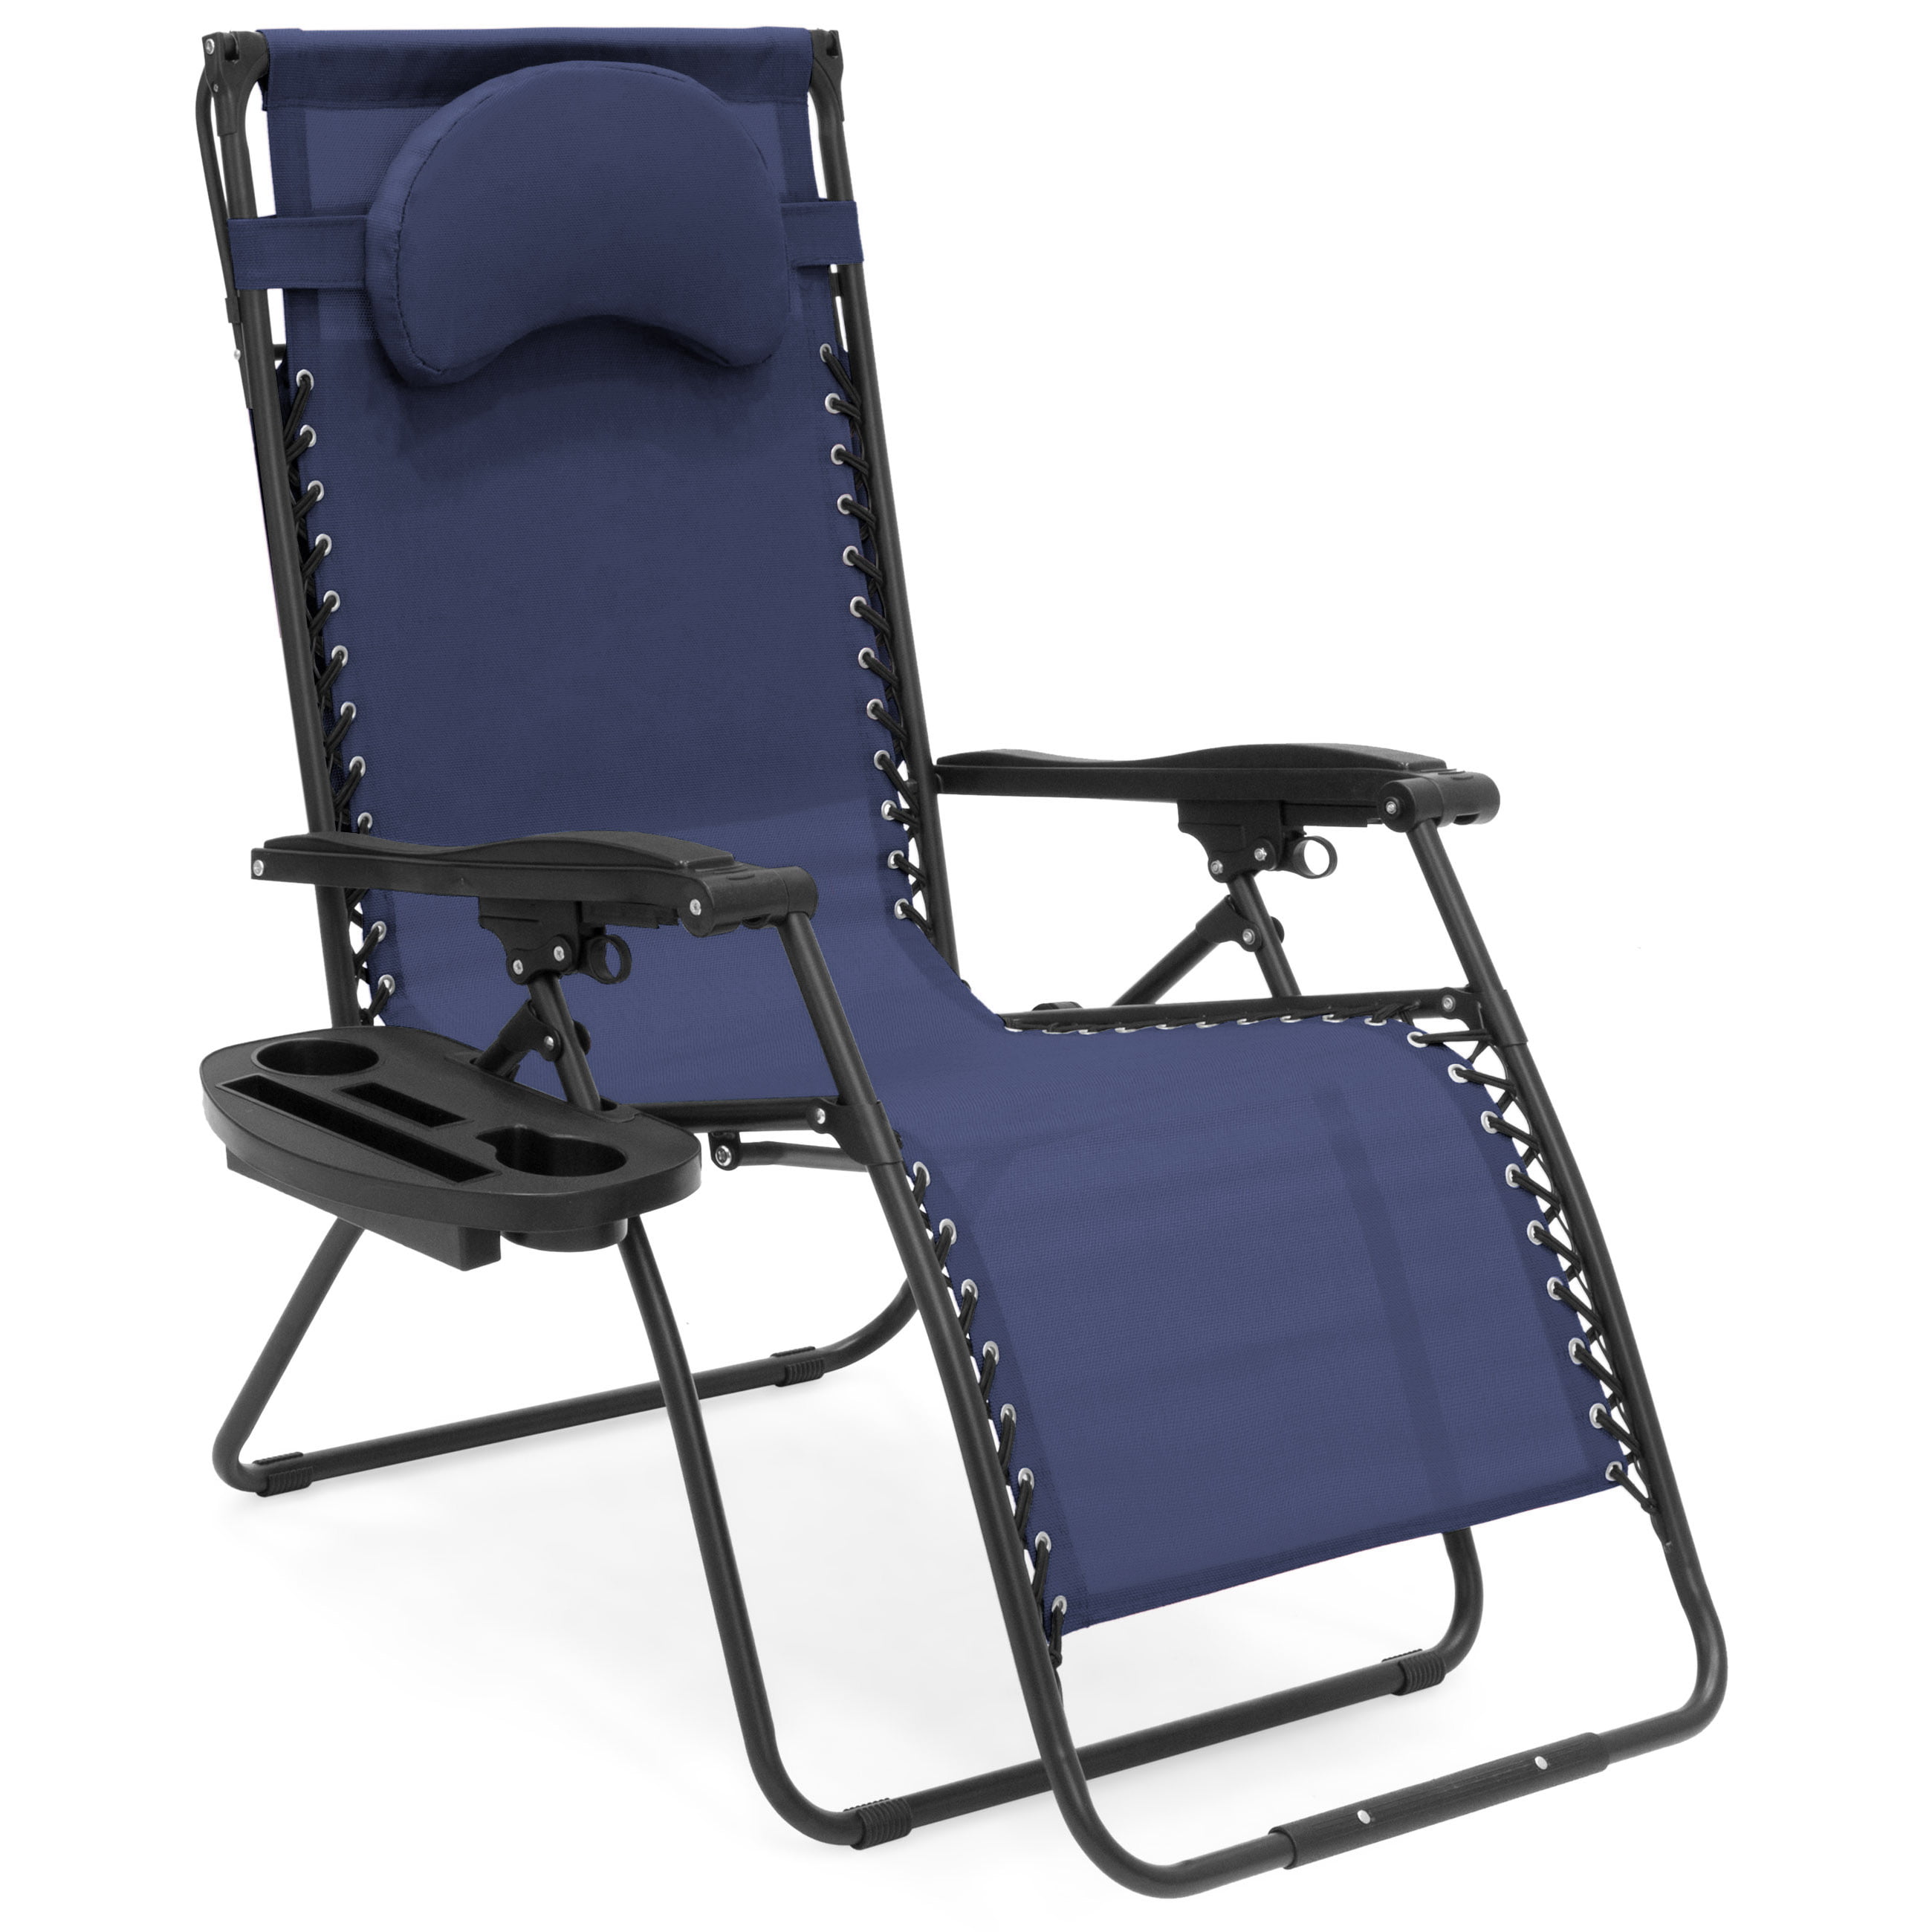 Navy Best Choice Products Oversized Zero Gravity Reclining Lounge Patio Chairs w/ Folding Canopy Shade and Cup Holder 